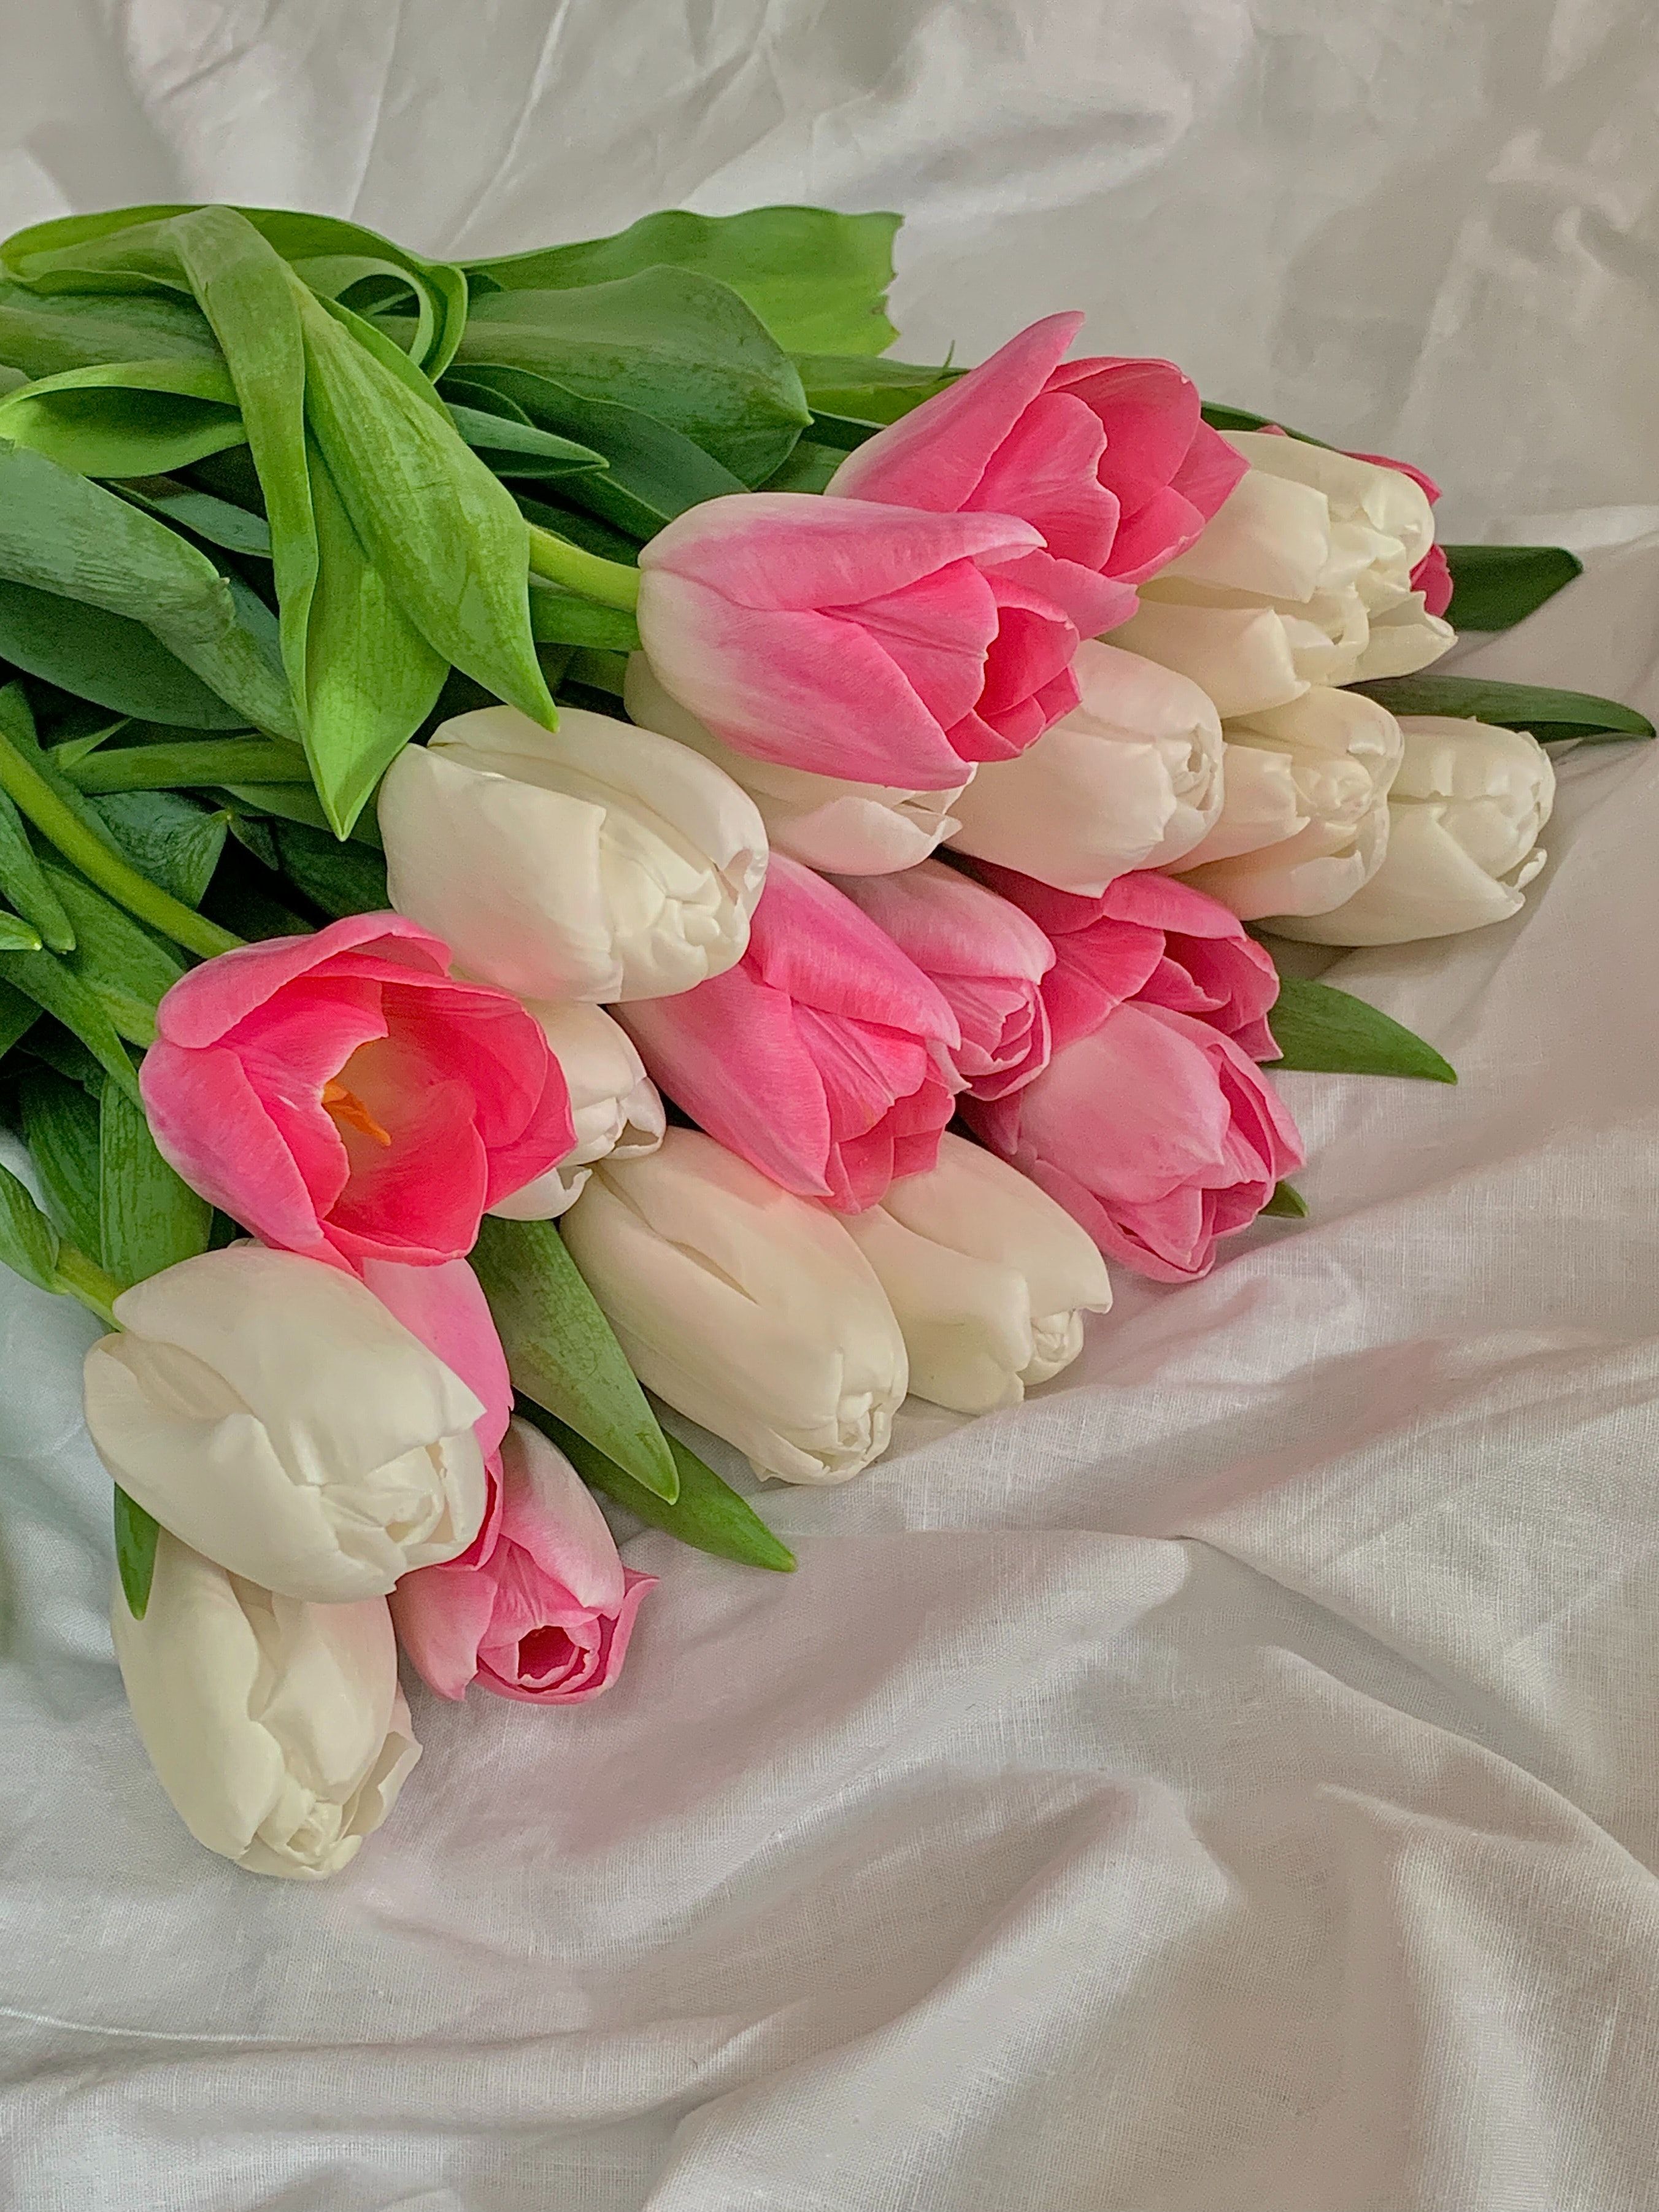 A bouquet of pink and white tulips on a white sheet. - Tulip